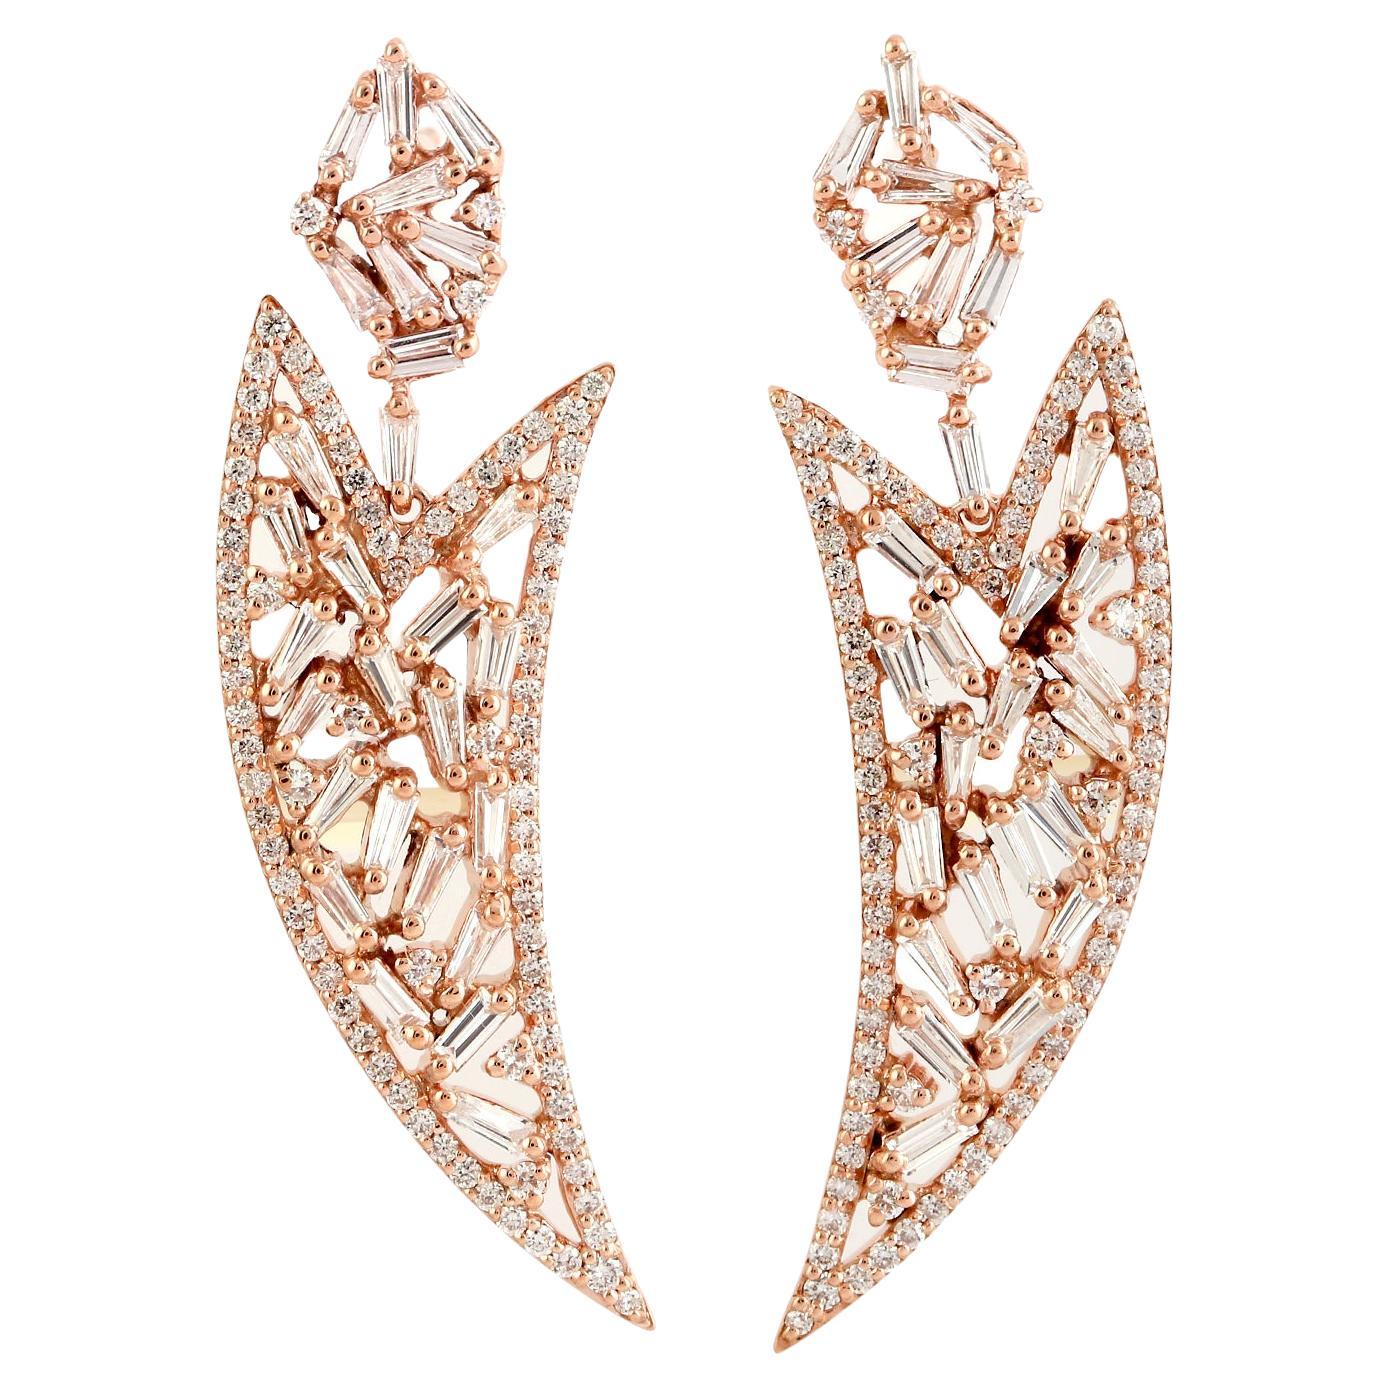 Claw Shaped Dangle Earrings With Baguette Diamonds Made In 18k Rose Gold For Sale